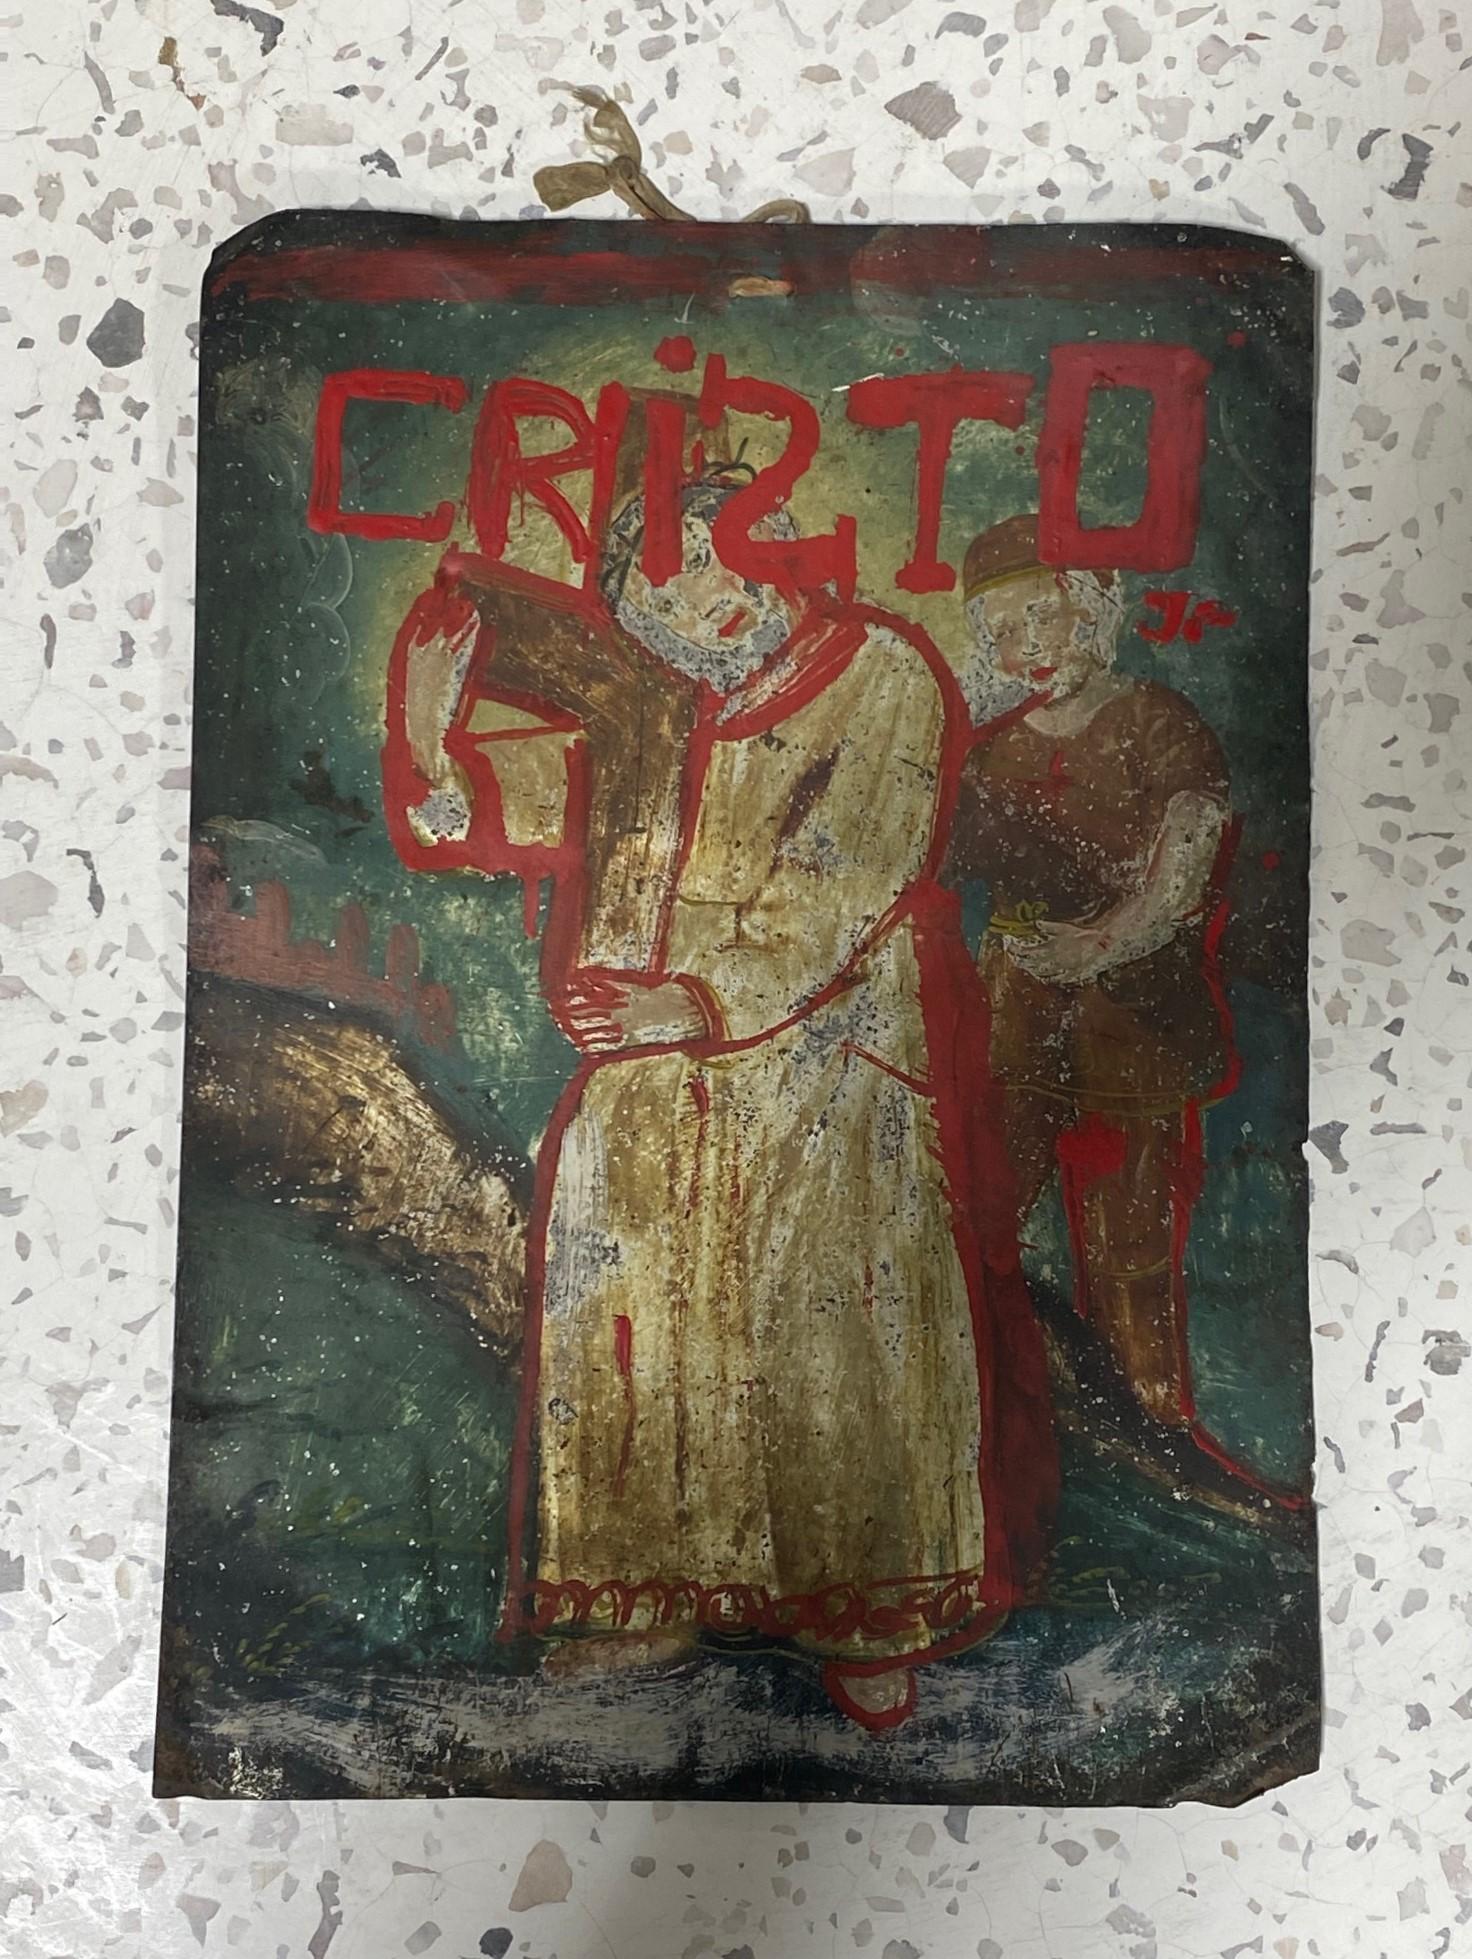 A beautiful 19th century Colonial Mexico folk art religious original retablo devotional painting of the Catholic Christ bearing the cross before the crucifixion. 

The piece is likely from a collection as it has an accession number on the verso as